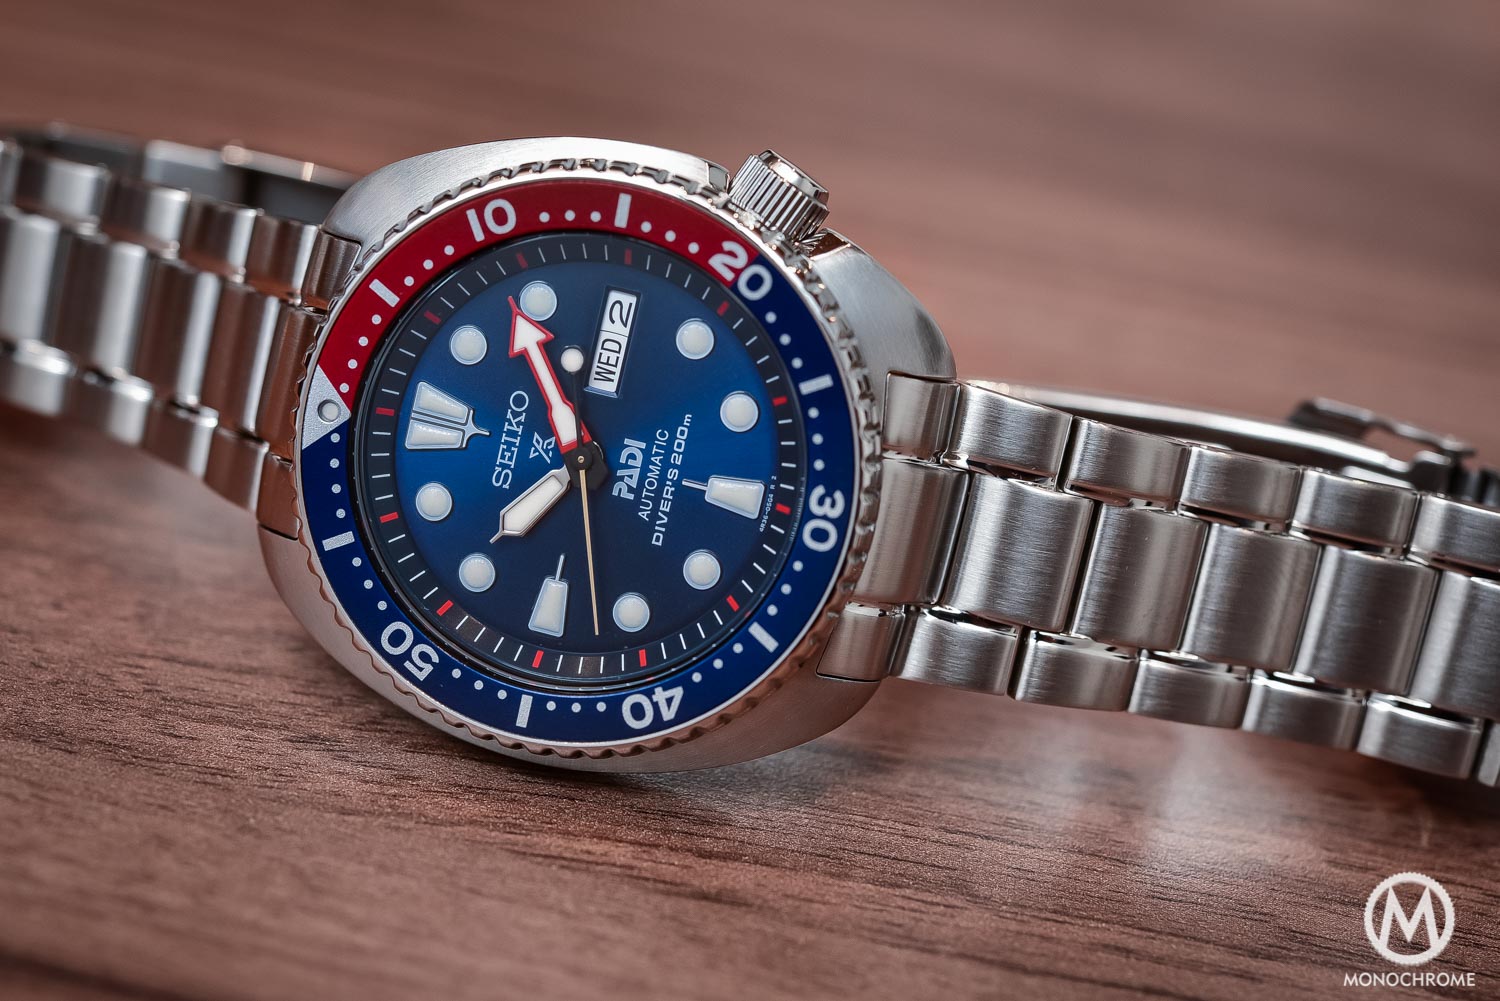 Hands-On Review - Seiko Prospex SRPA21 PADI Turtle - A nice, colorful, affordable dive for summer (live specs price) - Monochrome Watches